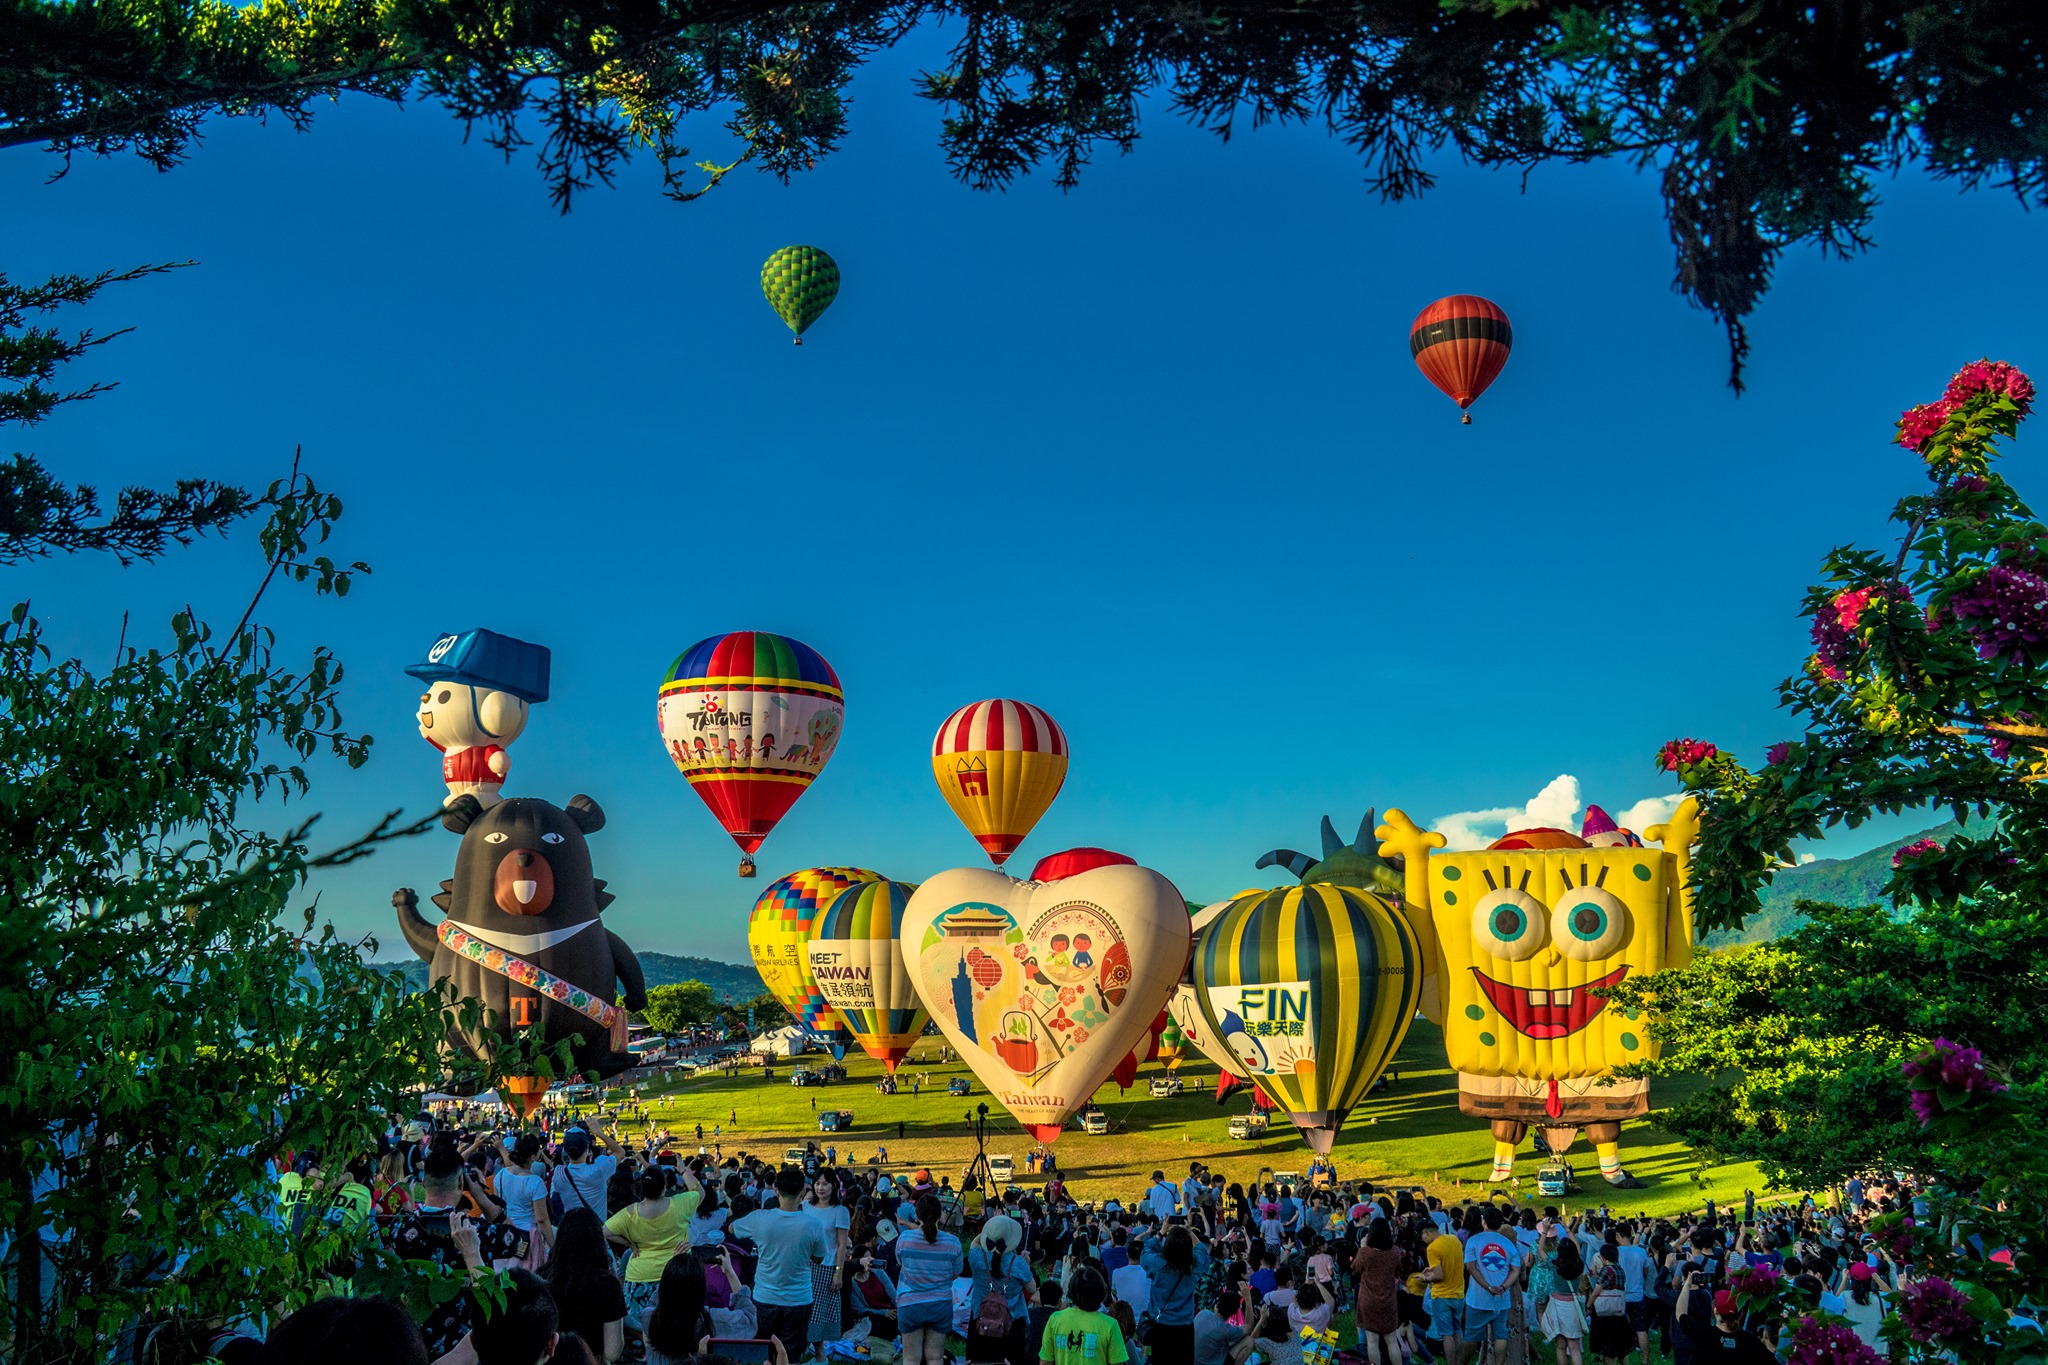 Debuting the World's Only Balloon Festival 2020 Taiwan International